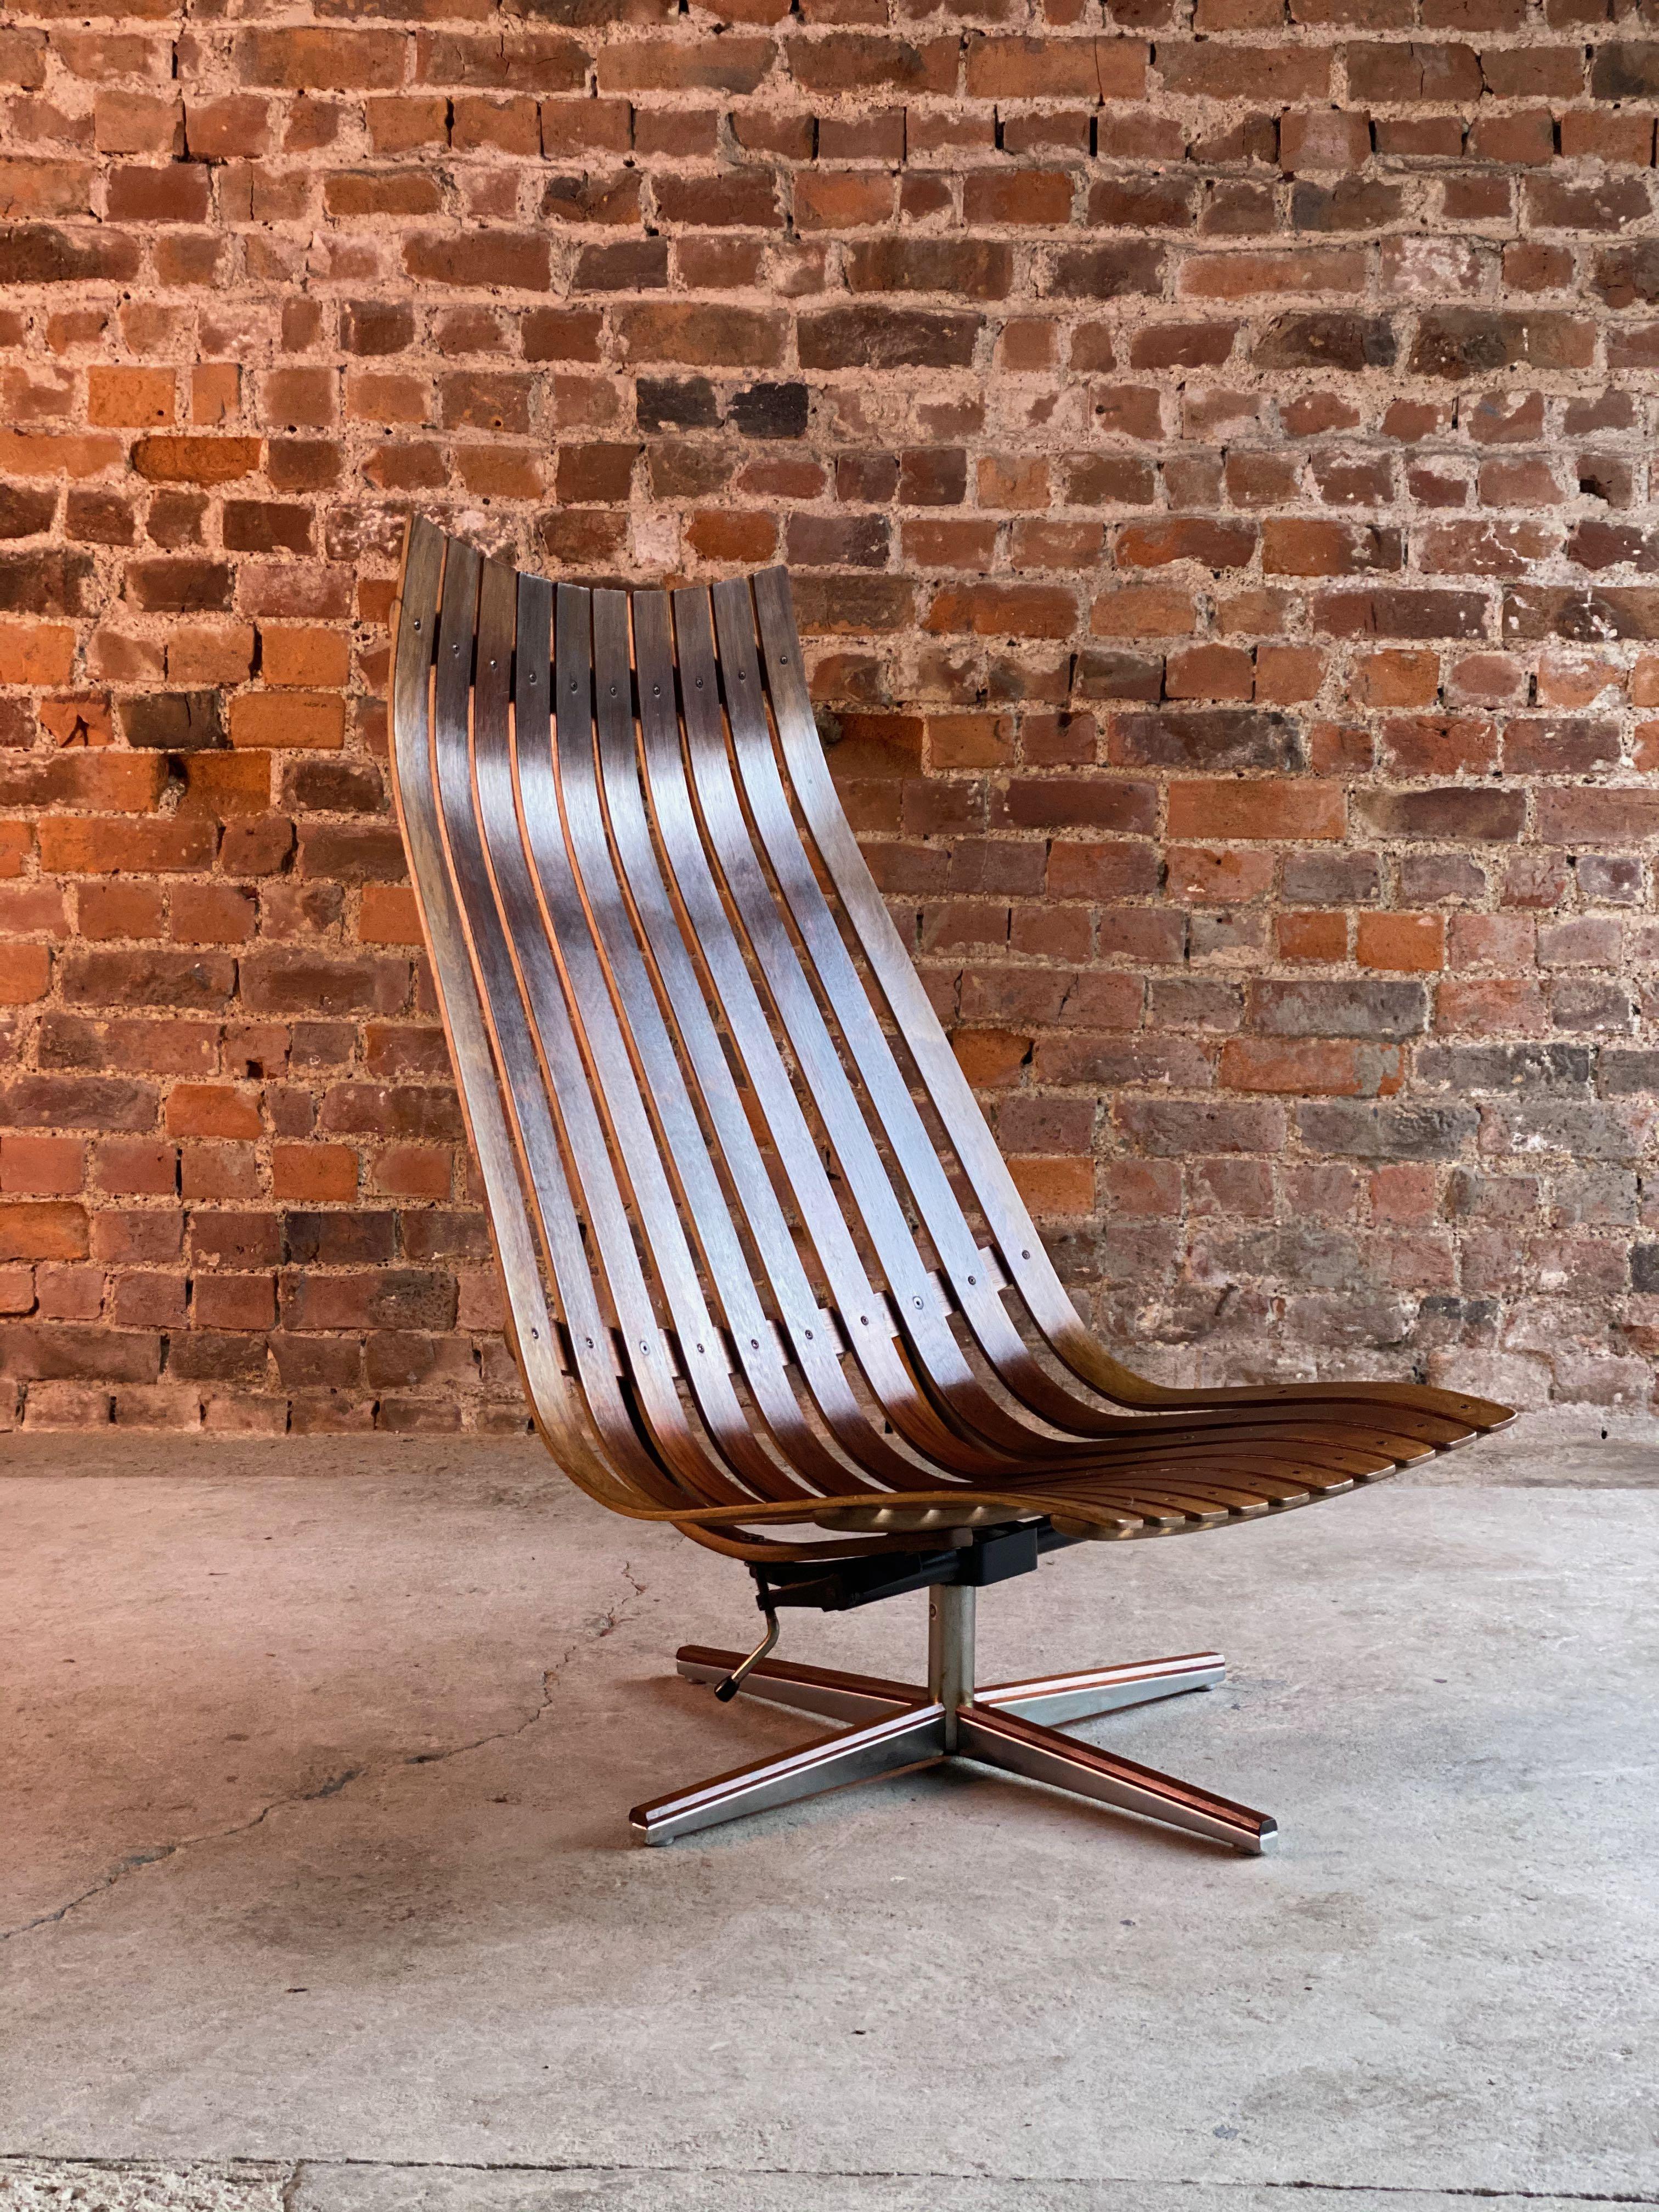 Hans Brattrud Scandia rosewood lounge chair by Georg Eknes, Norway, circa 1970

We are delighted to offer a Scandia Rio rosewood slatted lounge chair Norway circa 1970, designed by Hans Brattrud for Georg Eknes, on a revolving stand, labelled